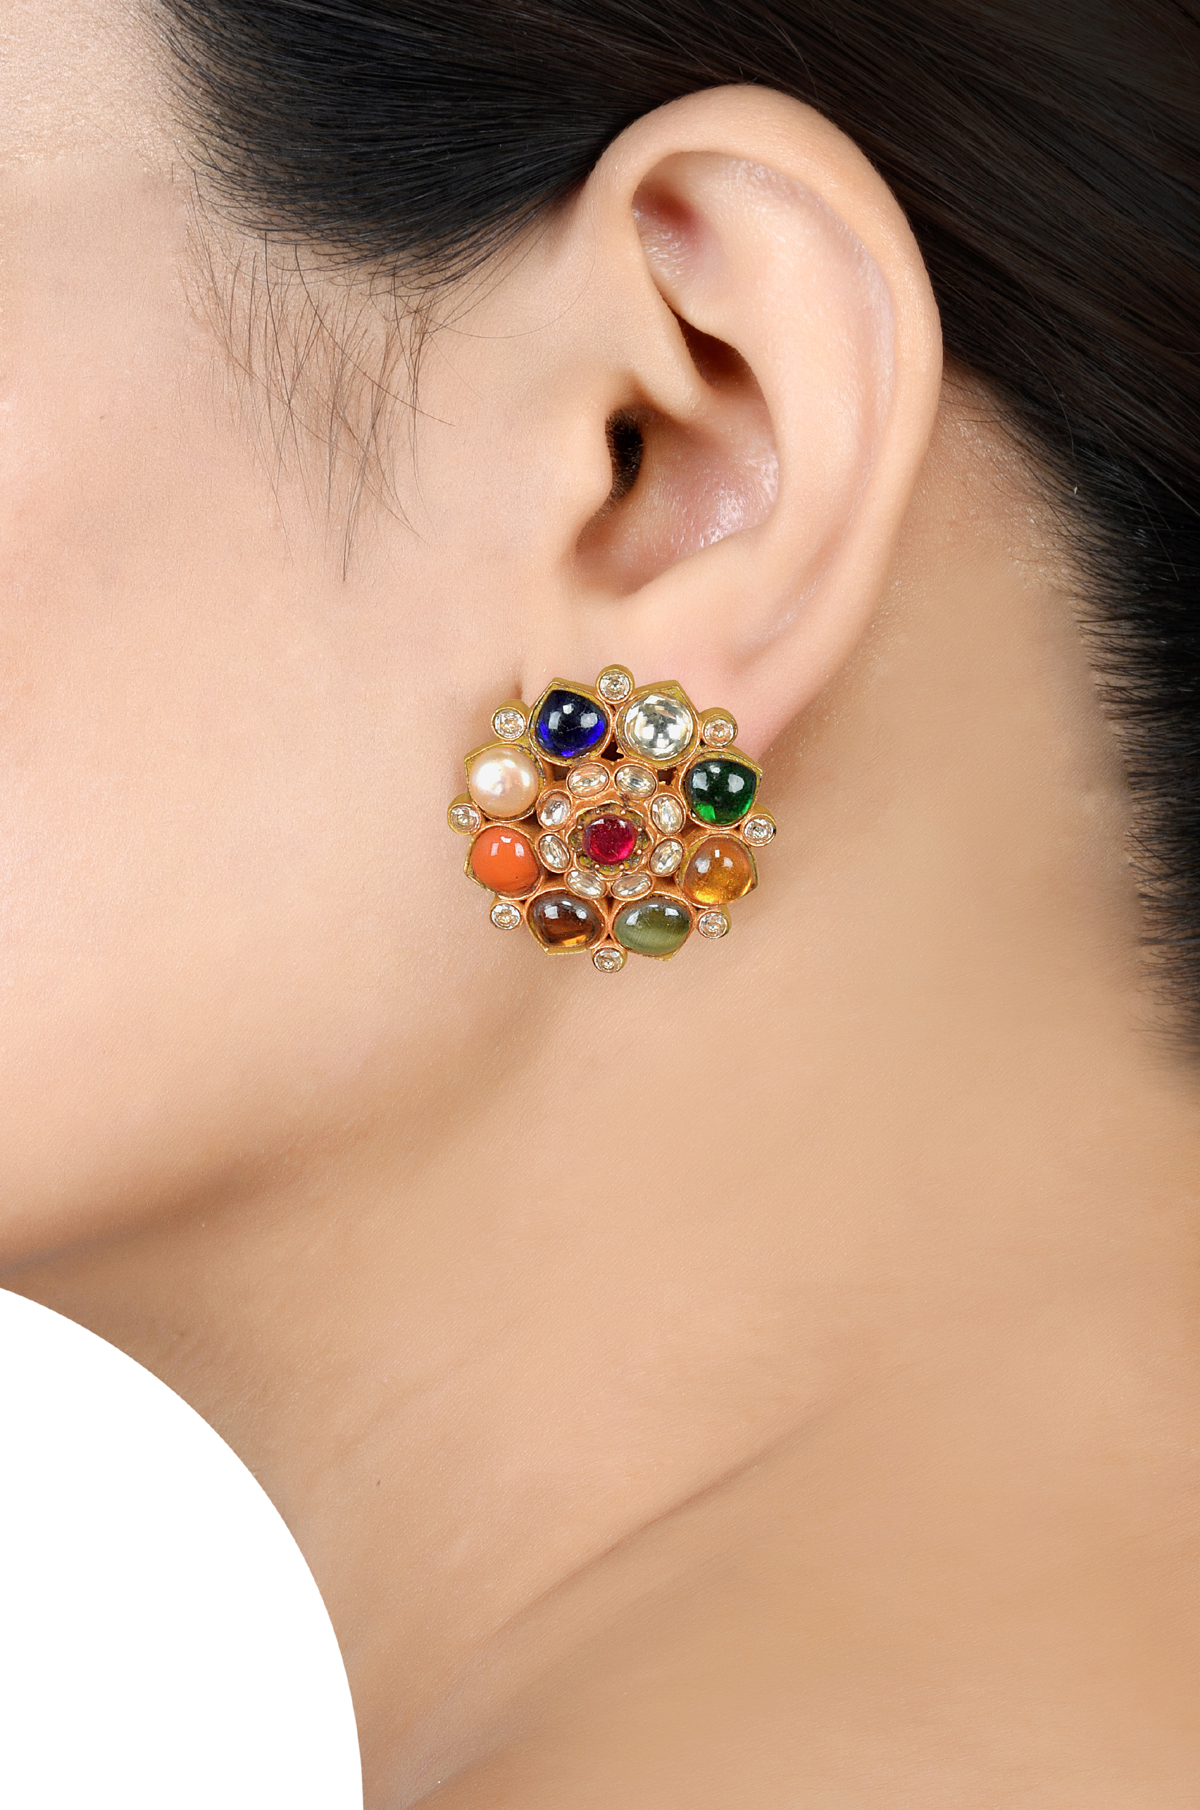 Buy Indian Handmade Navratna Studs Earrings by Asp Fashion Online in India  - Etsy